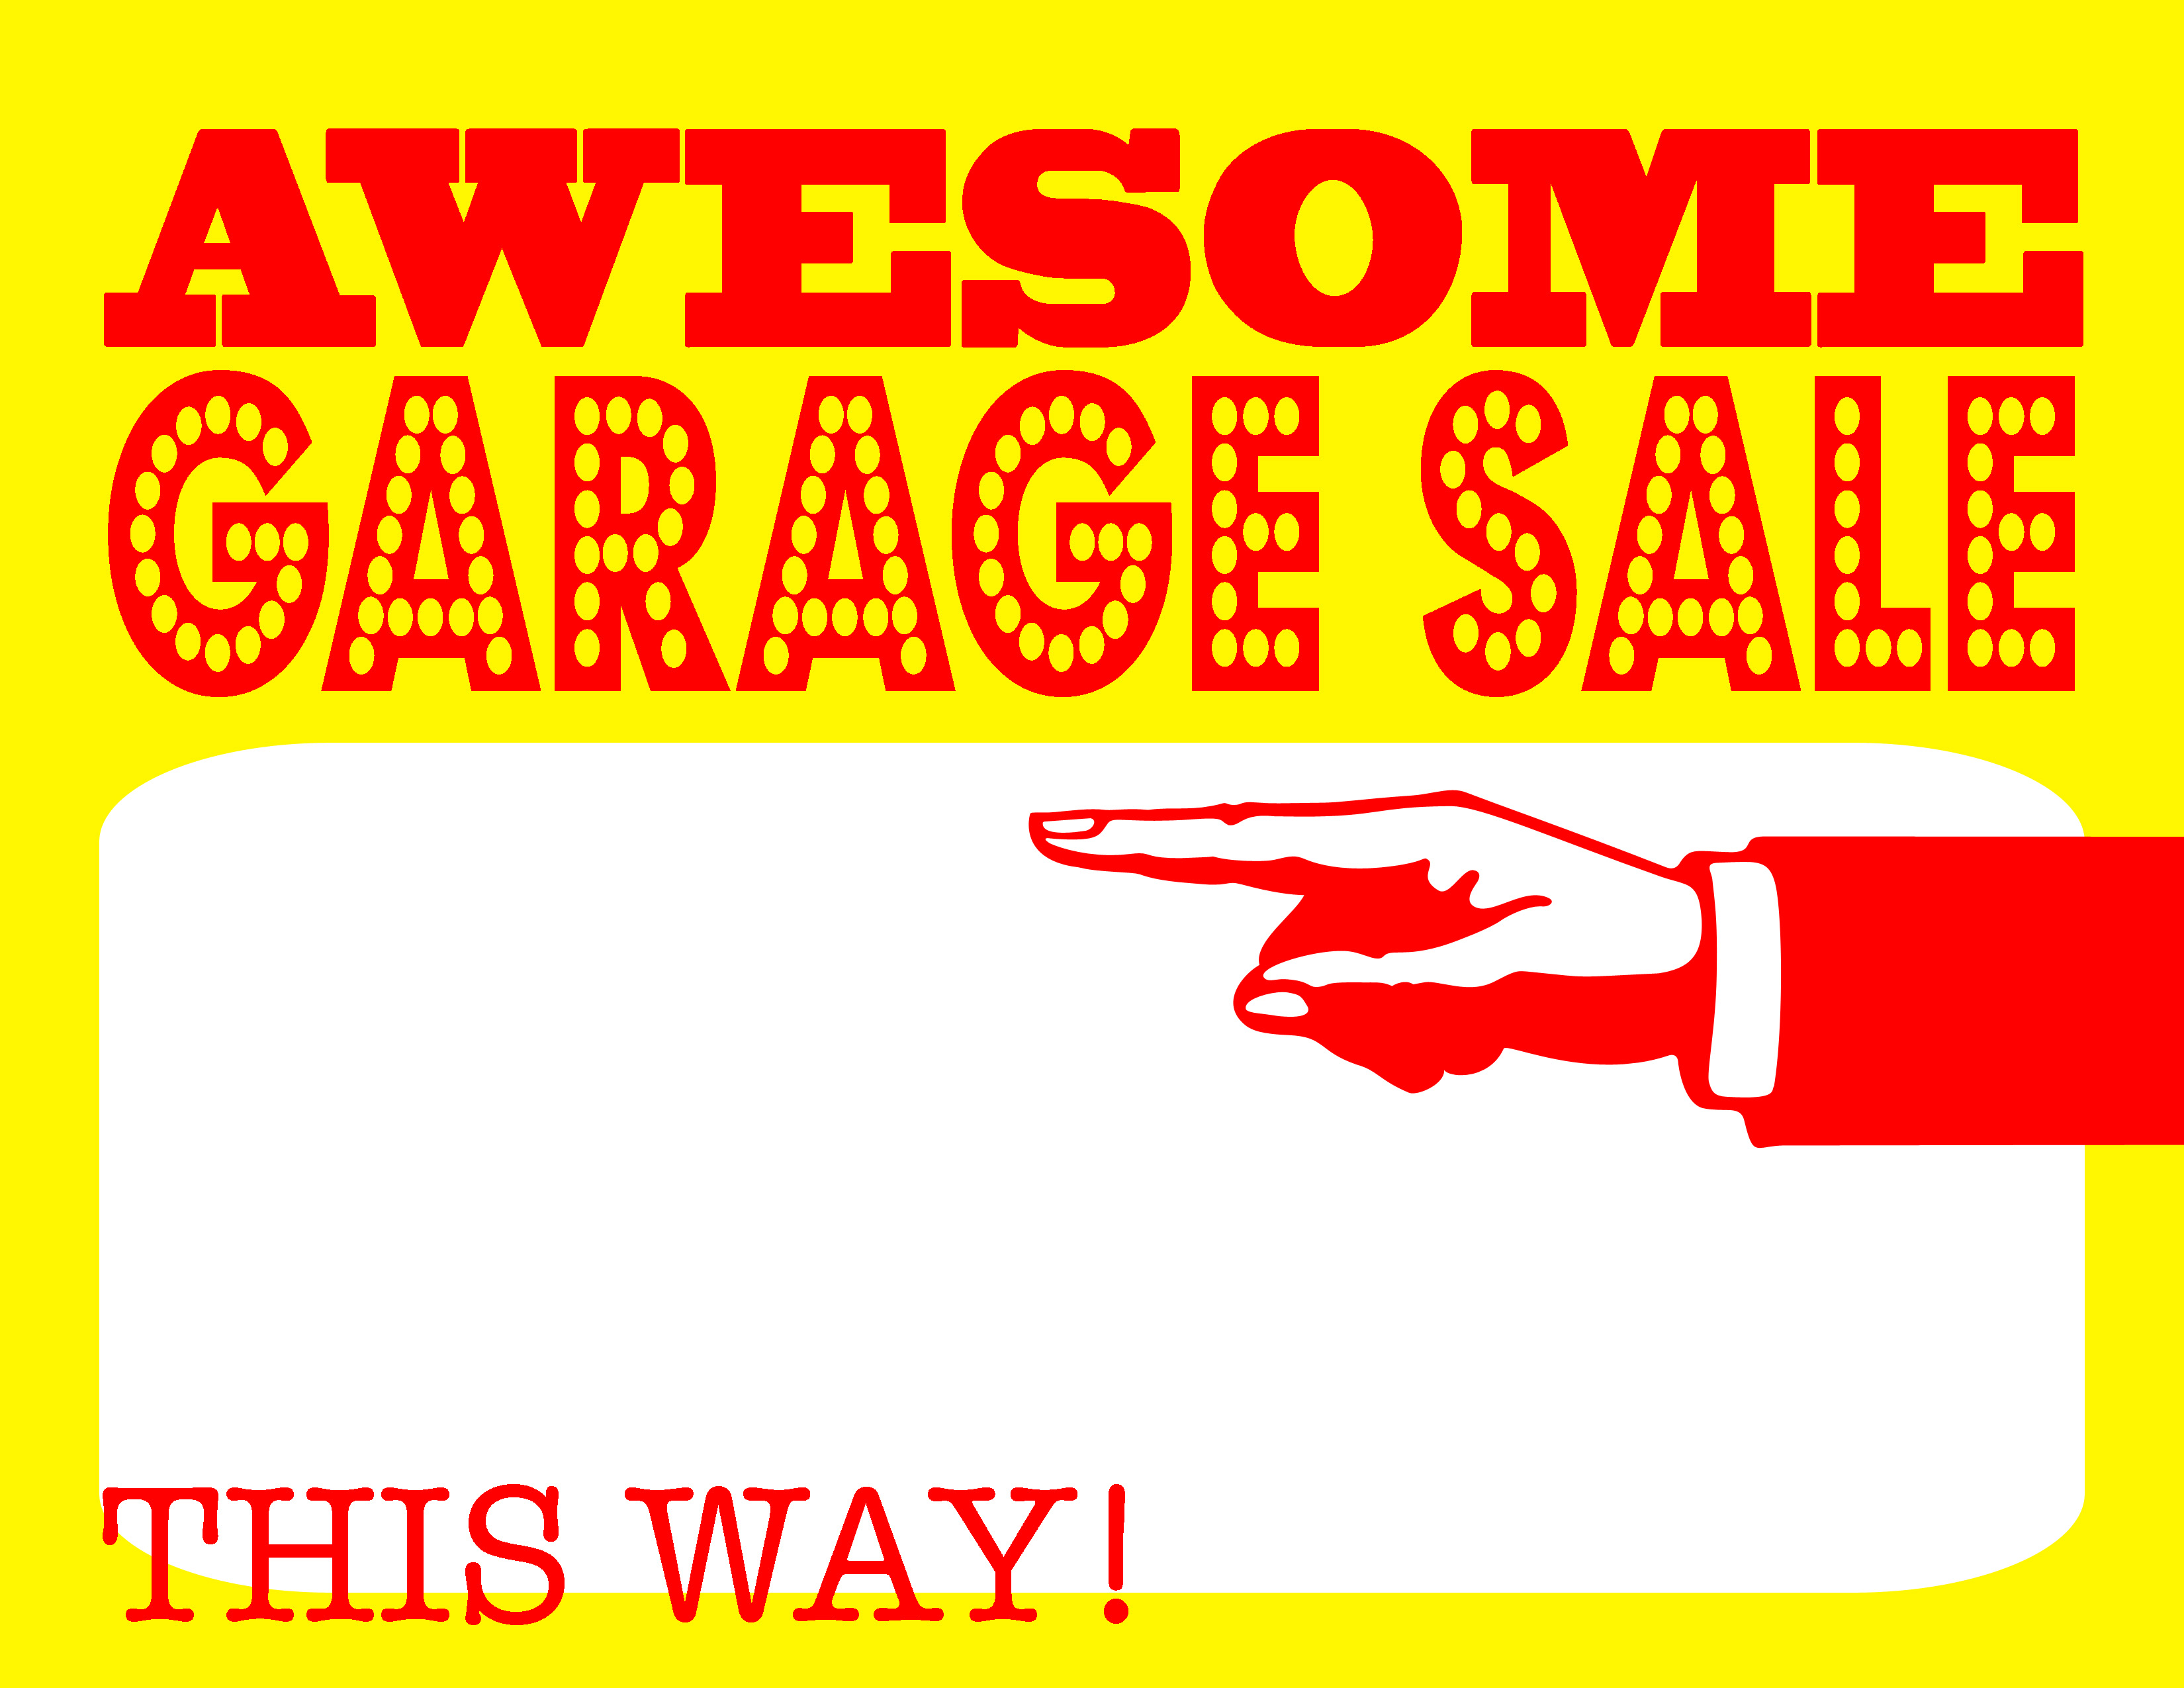 garage-sale-signs-tips-and-ideas-for-attention-grabbing-signs